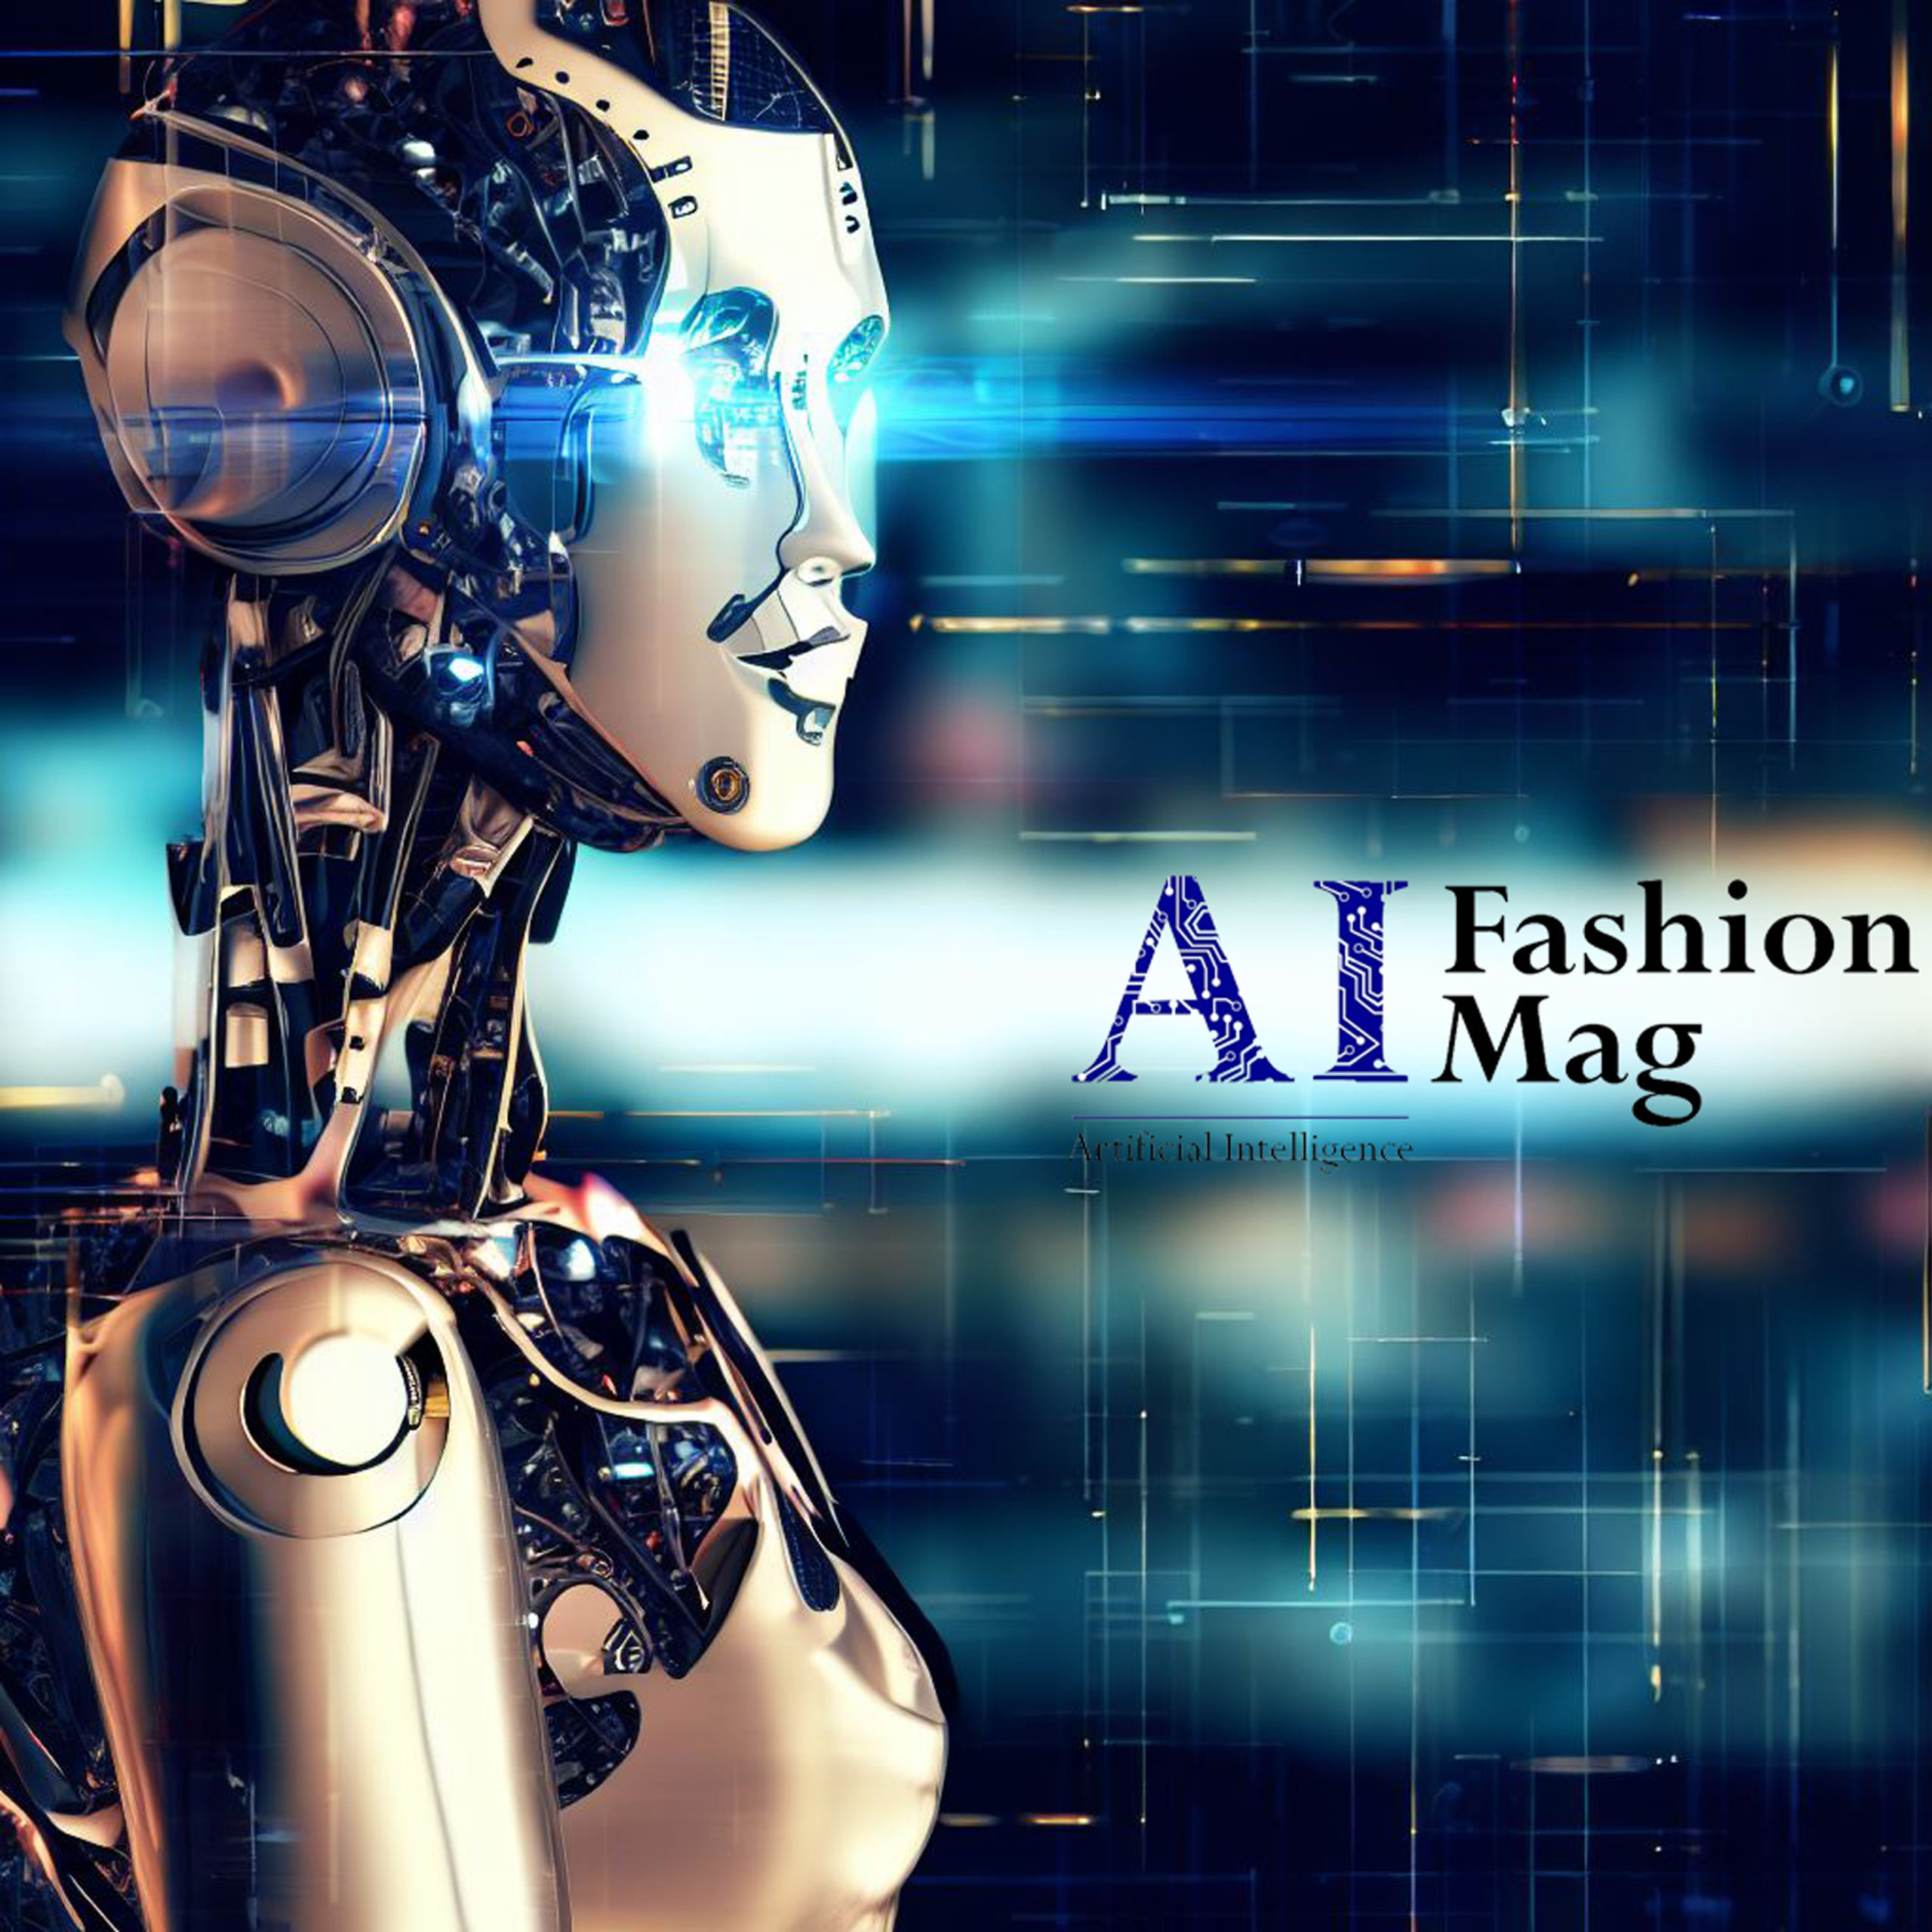 AI Fashion Mag share Experiences, Challenges and Visions